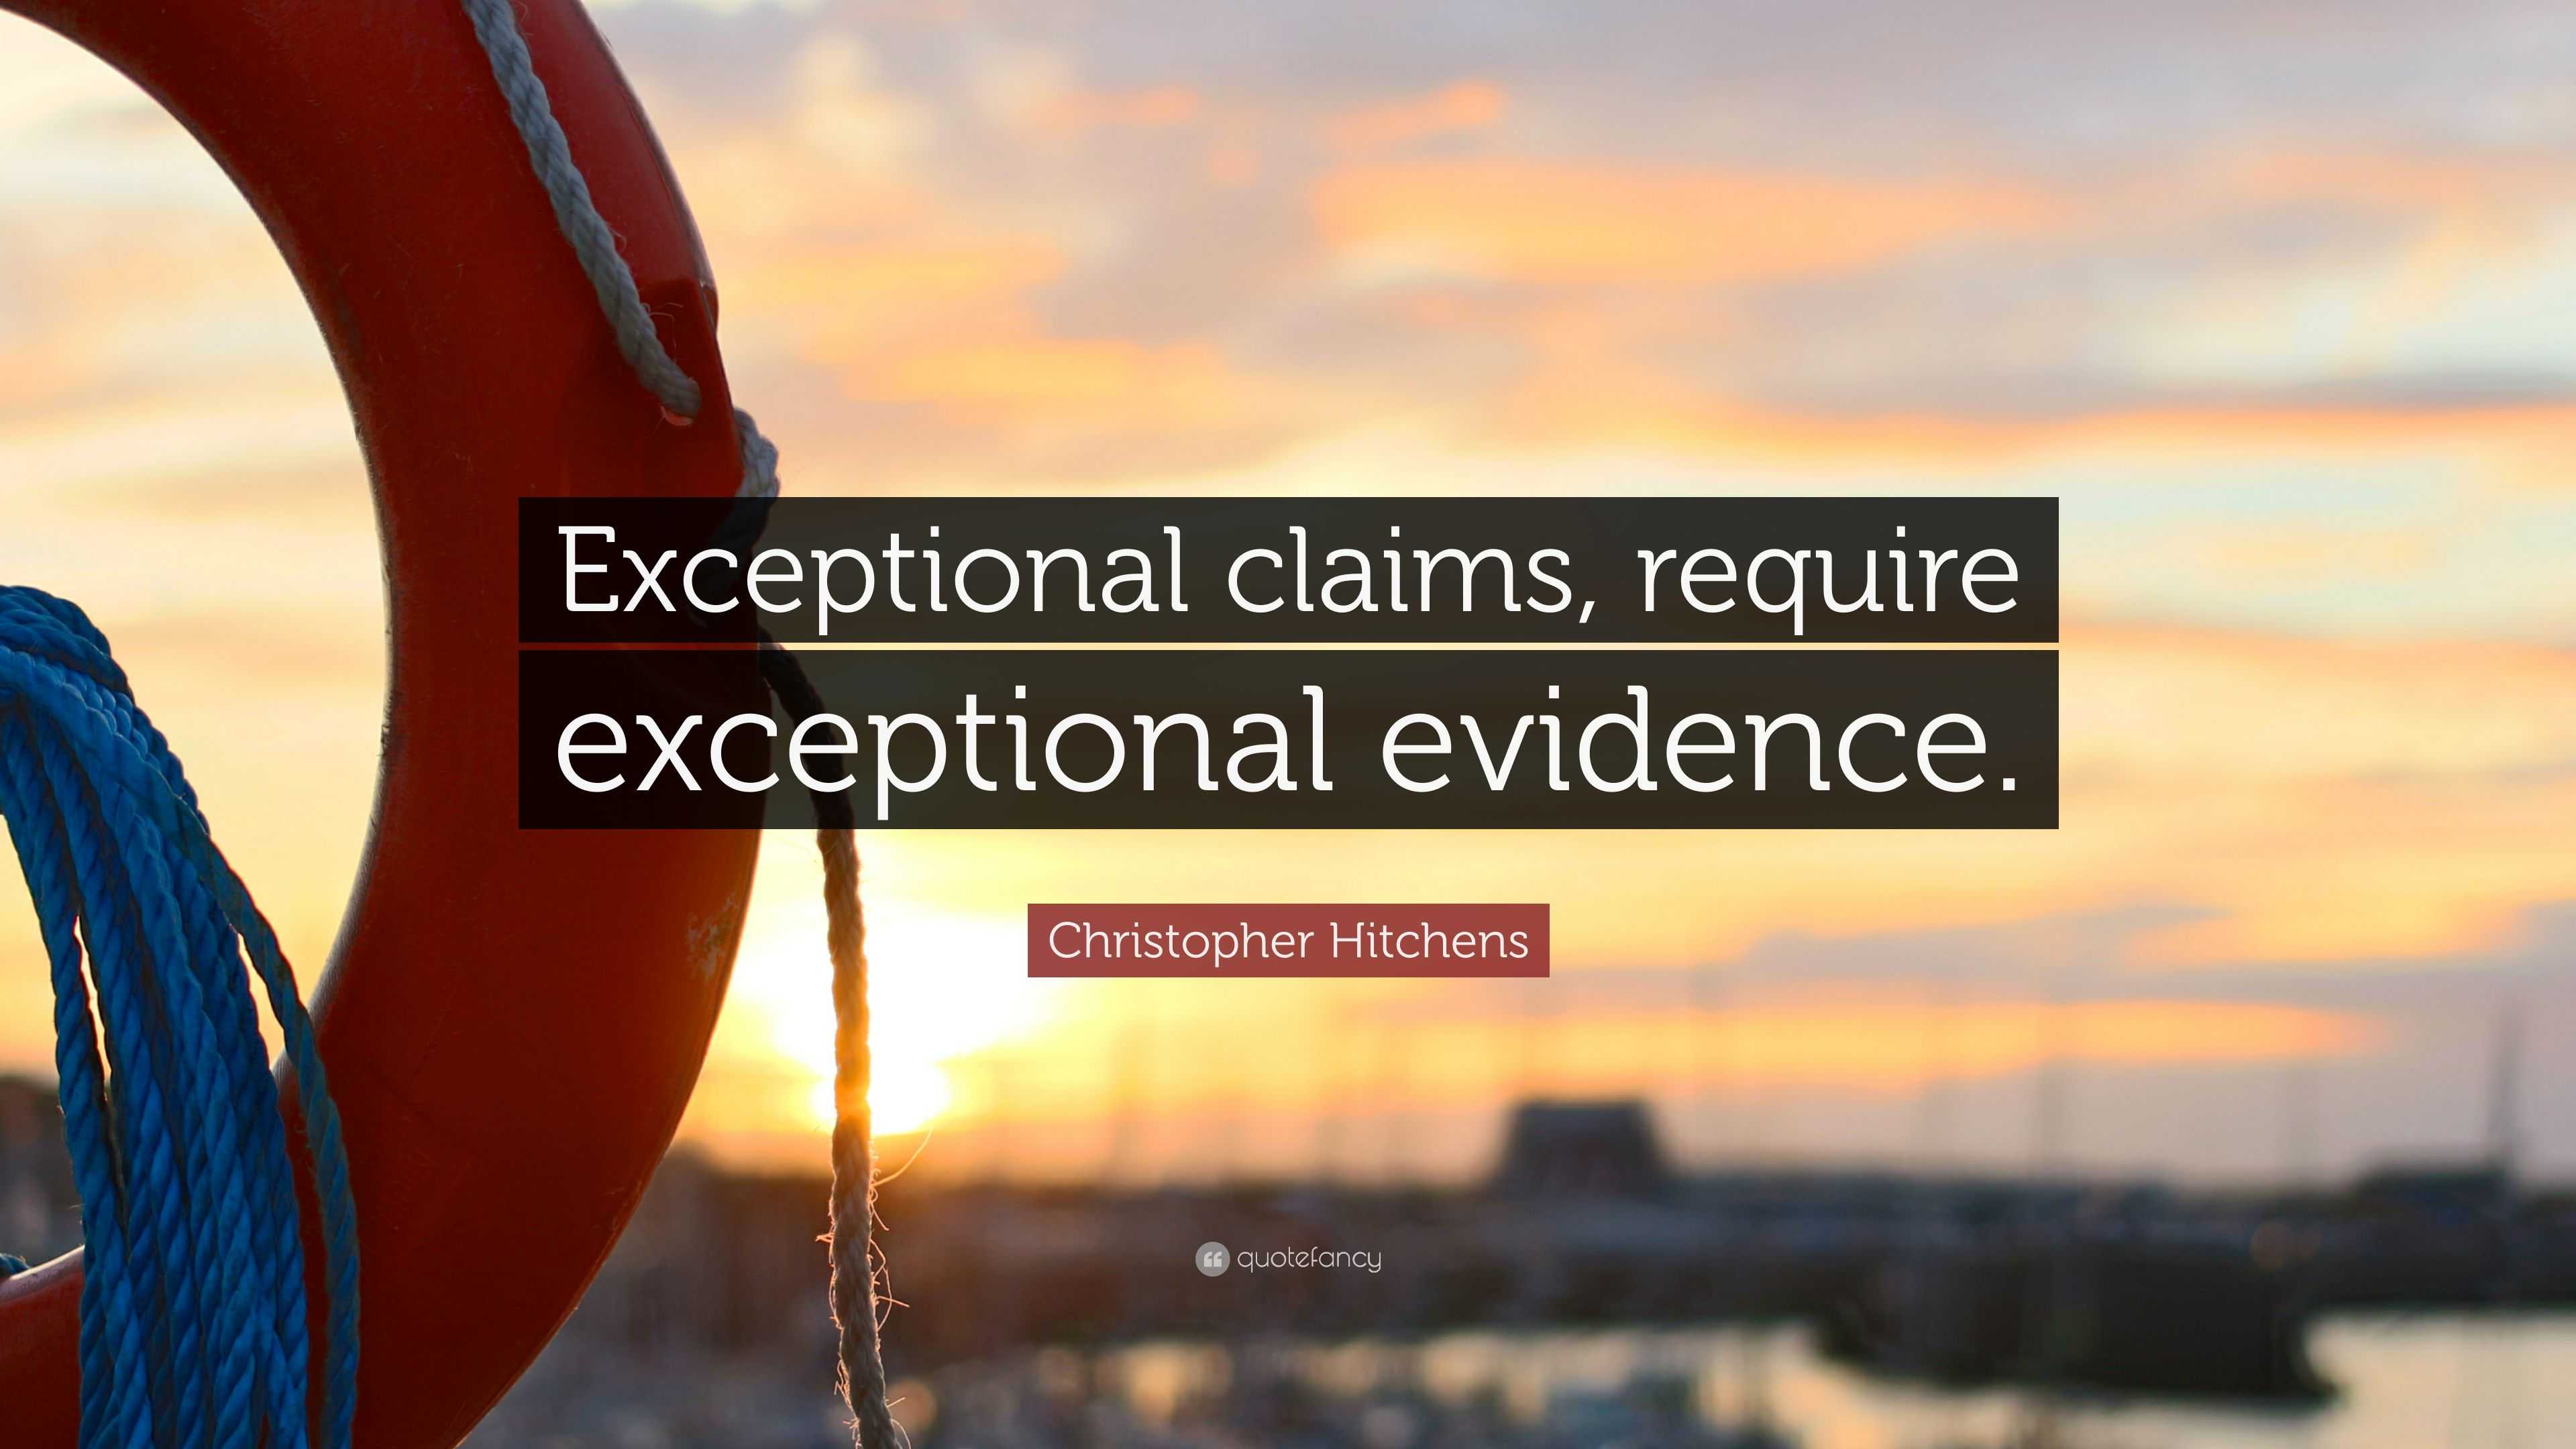 Christopher Hitchens Quote “exceptional Claims Require Exceptional Evidence” 6555